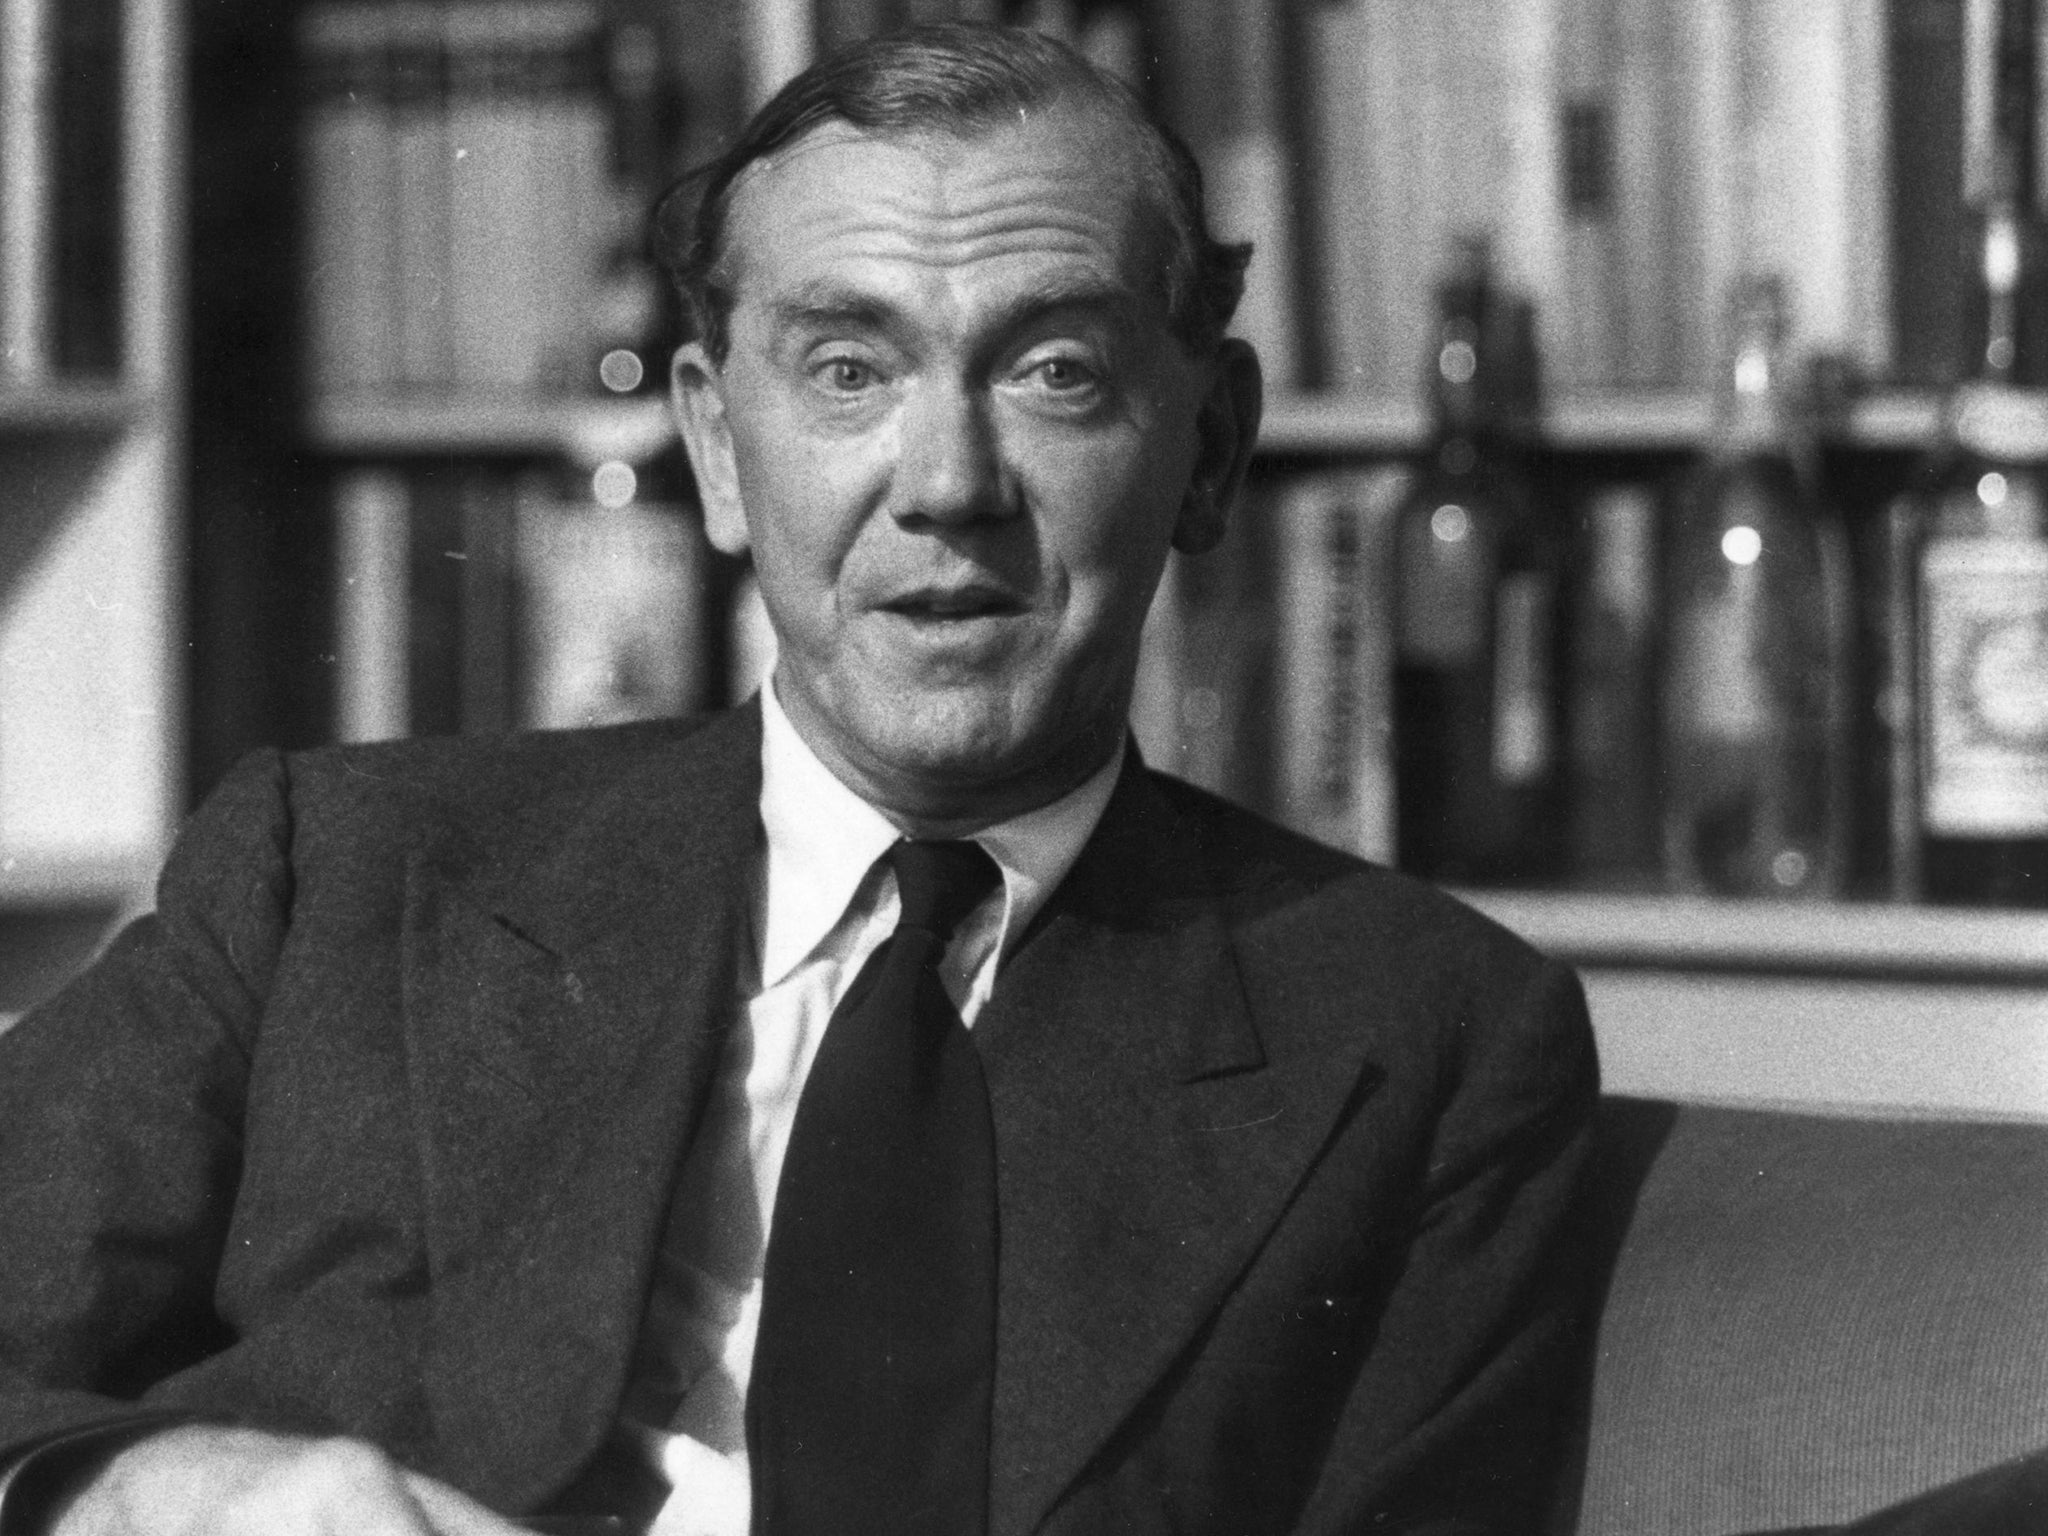 Graham Greene, photographed here at around the age of 50, had an affair with Lady Catherine Walston that lasted for two decades